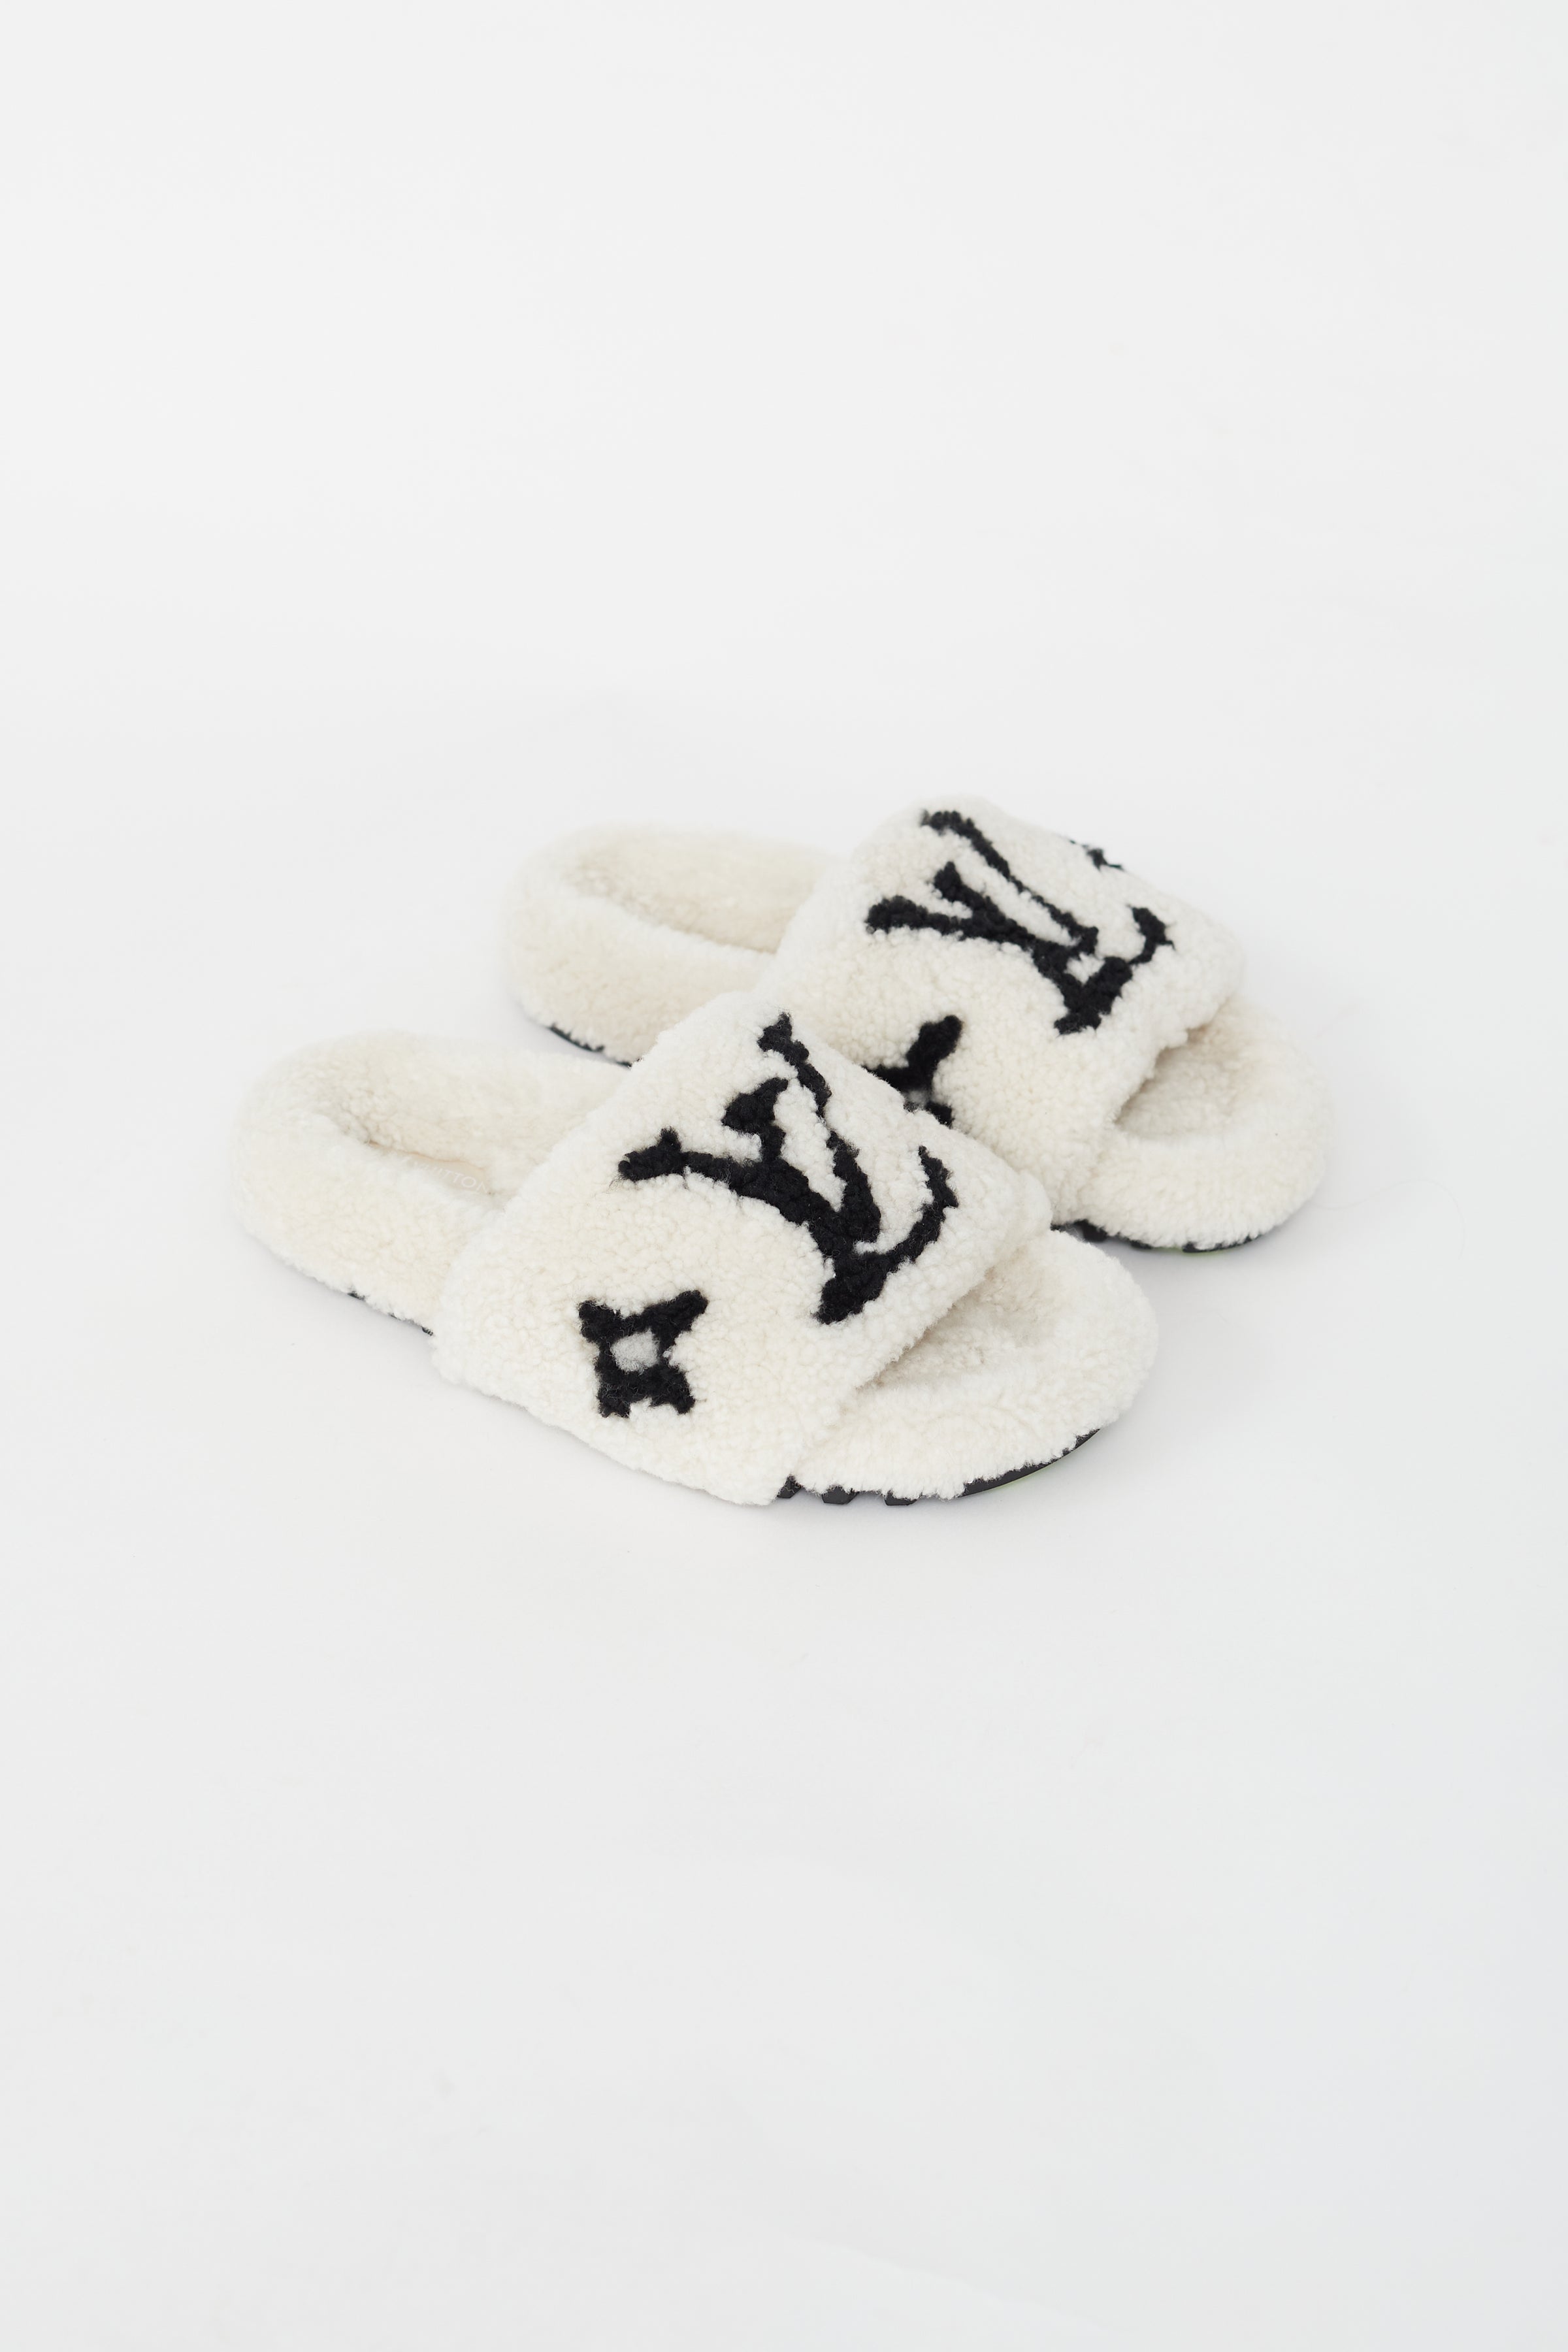 Louis Vuitton Shearling Slides, Black and White, Size 40, New in Box WA001